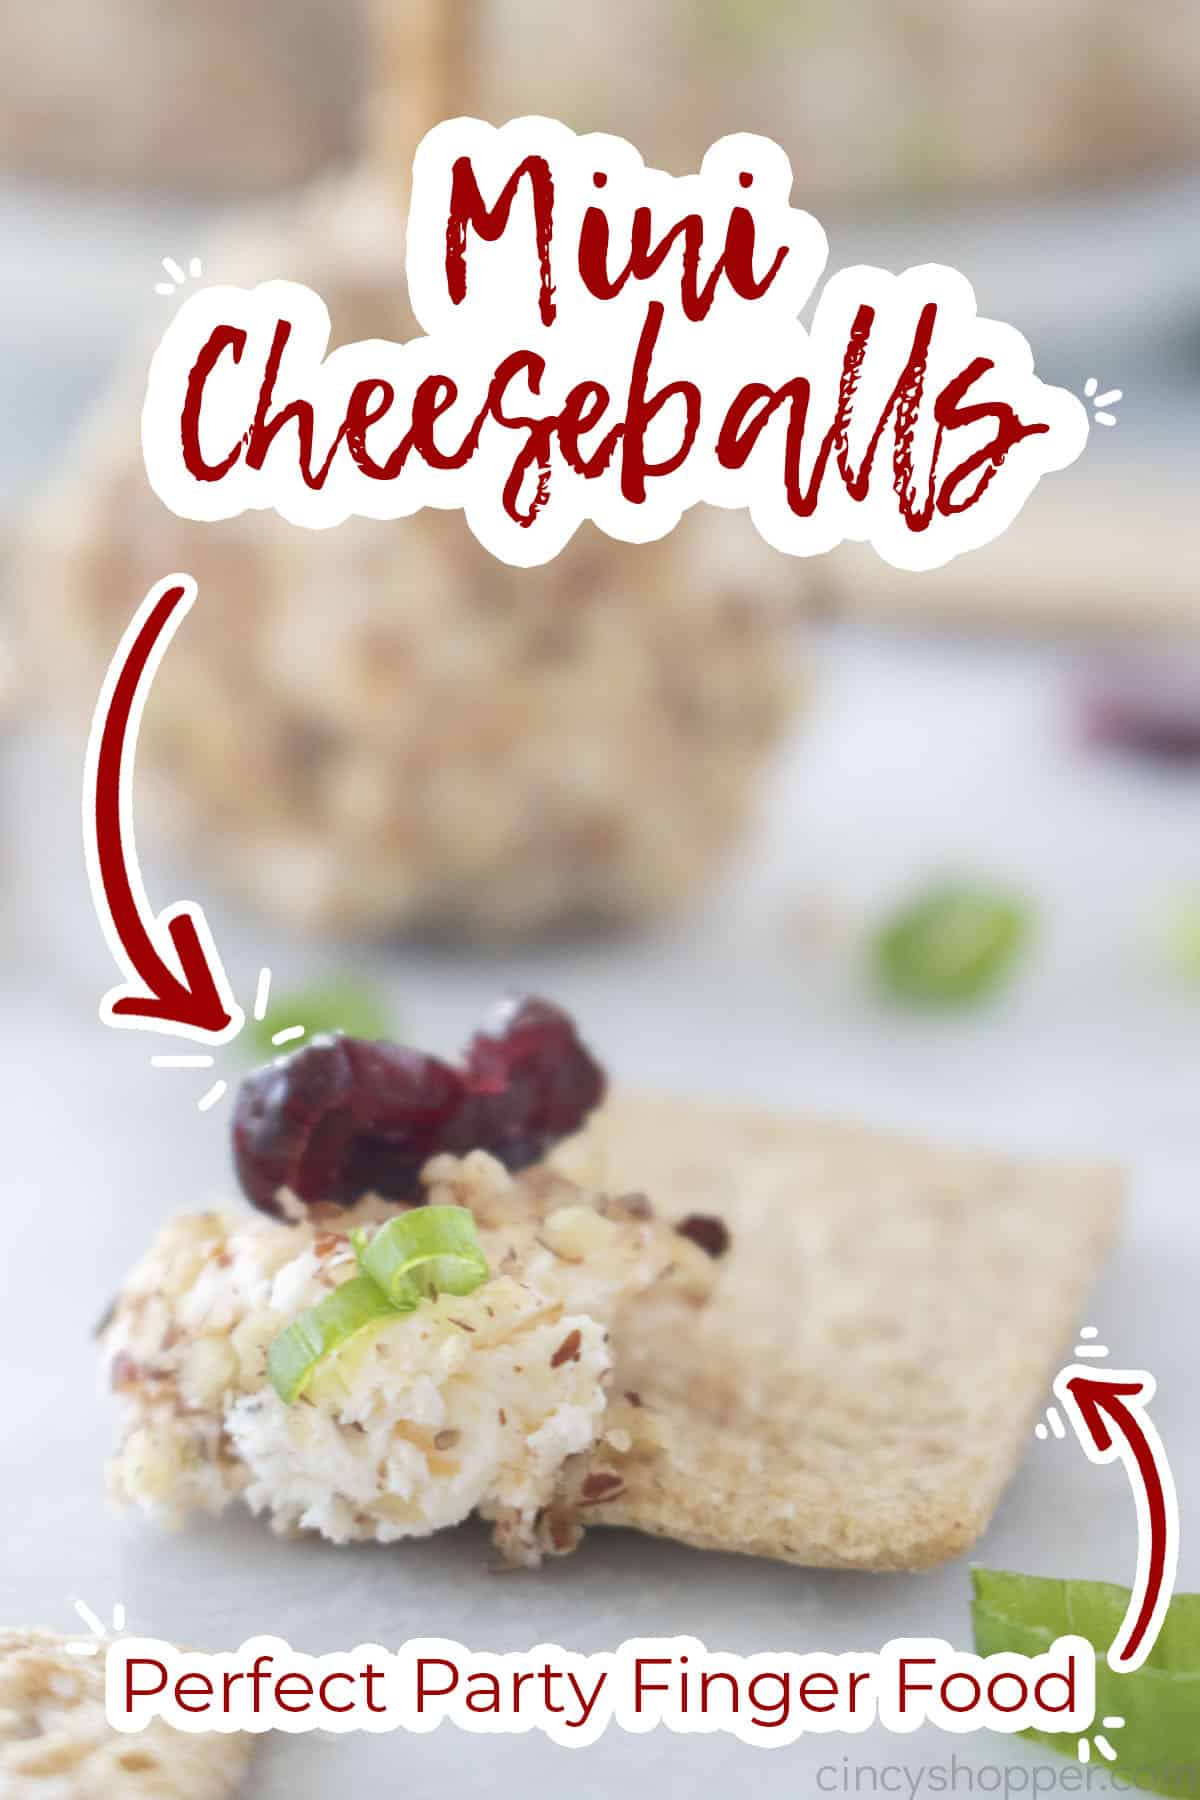 Text on image Mini Cheeseballs perfect Party finger food.